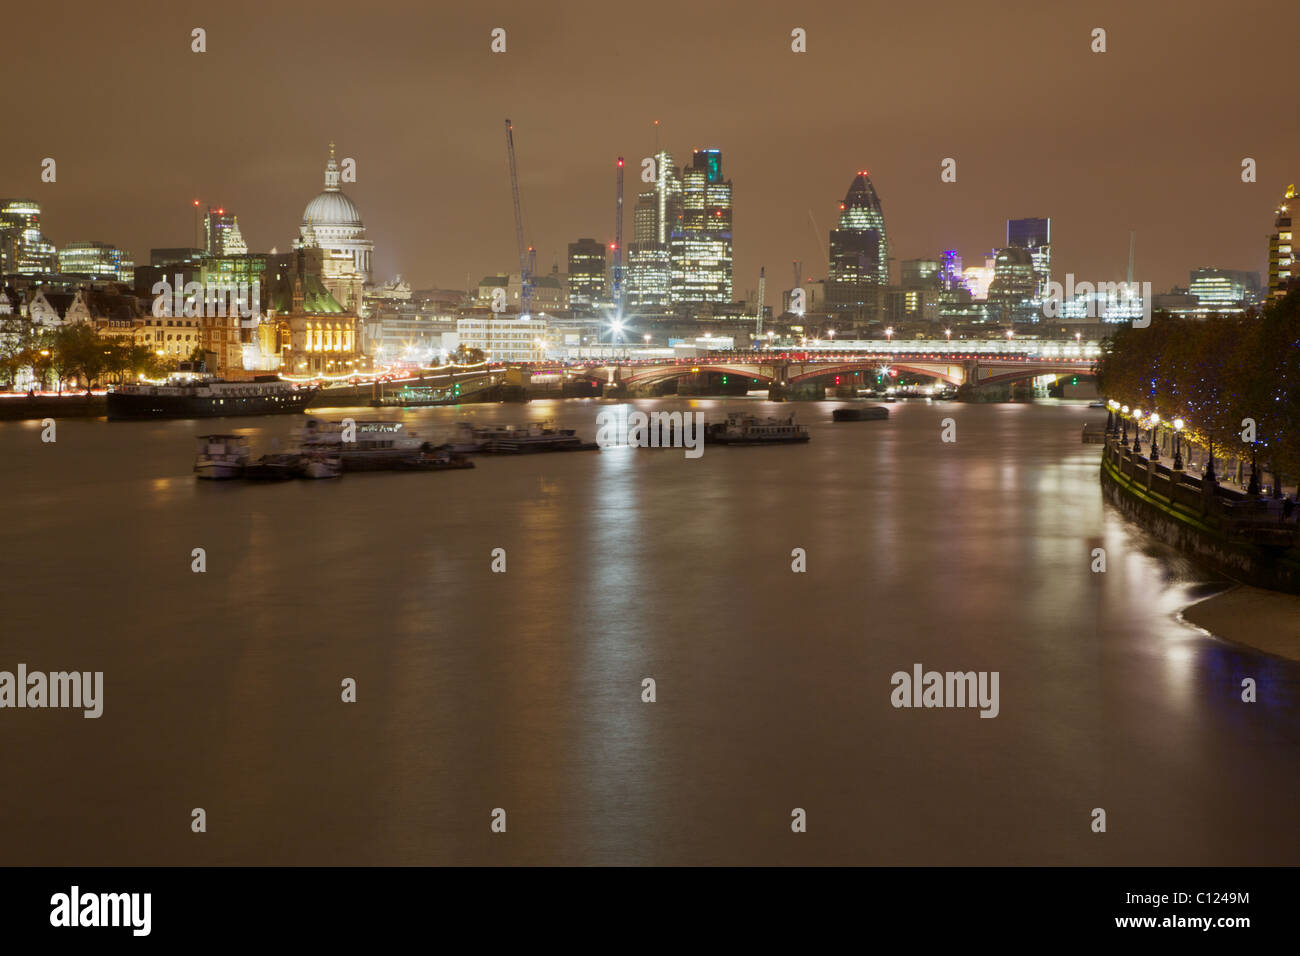 A night view of the City Of London skyline and River Thames. A long exposure gives the water a flat calm appearance. Stock Photo